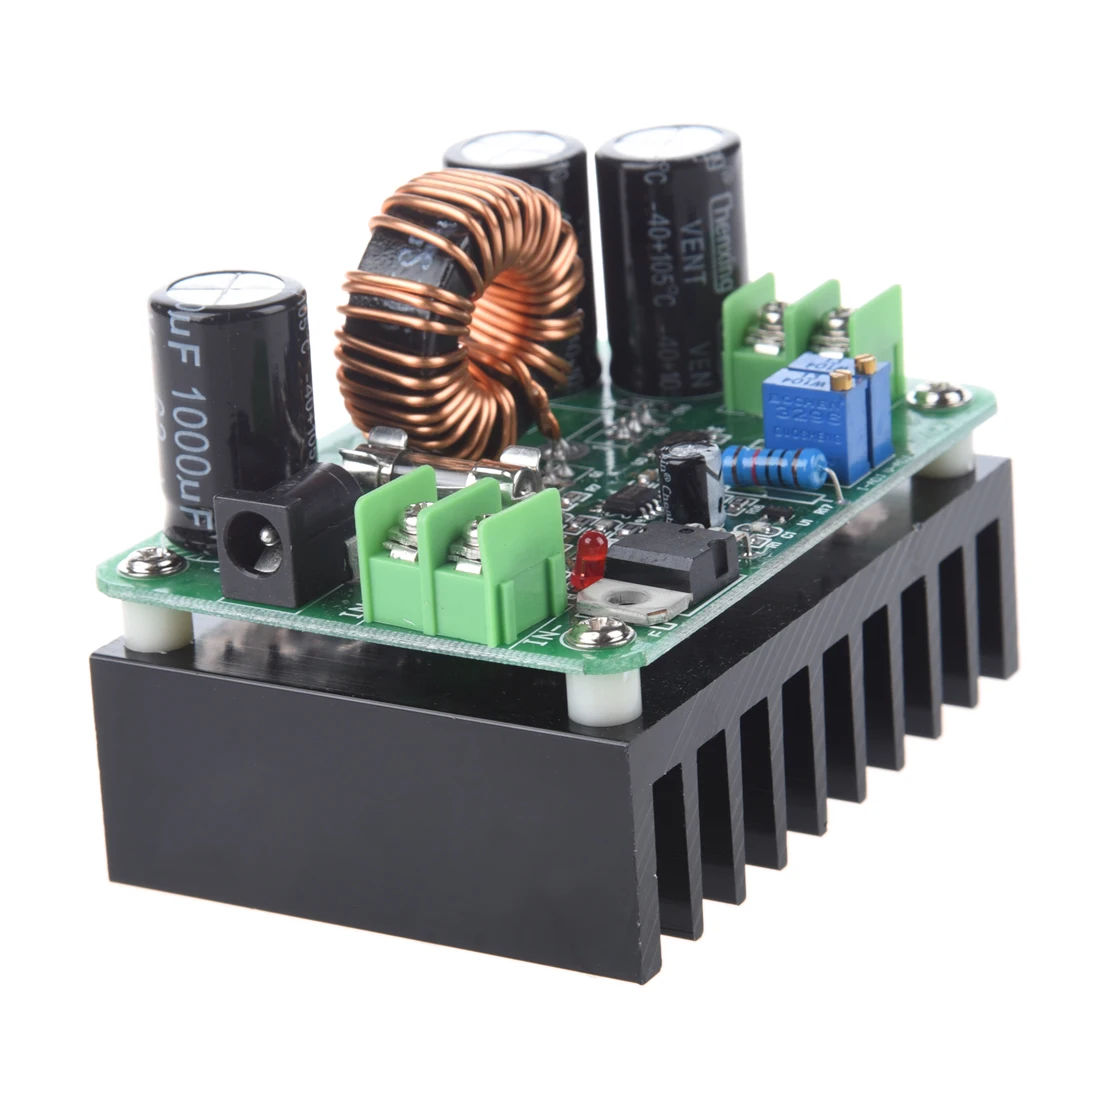 10A DC DC 600W 10 60V to 12 80V Boost Converter Step up Module Power ...